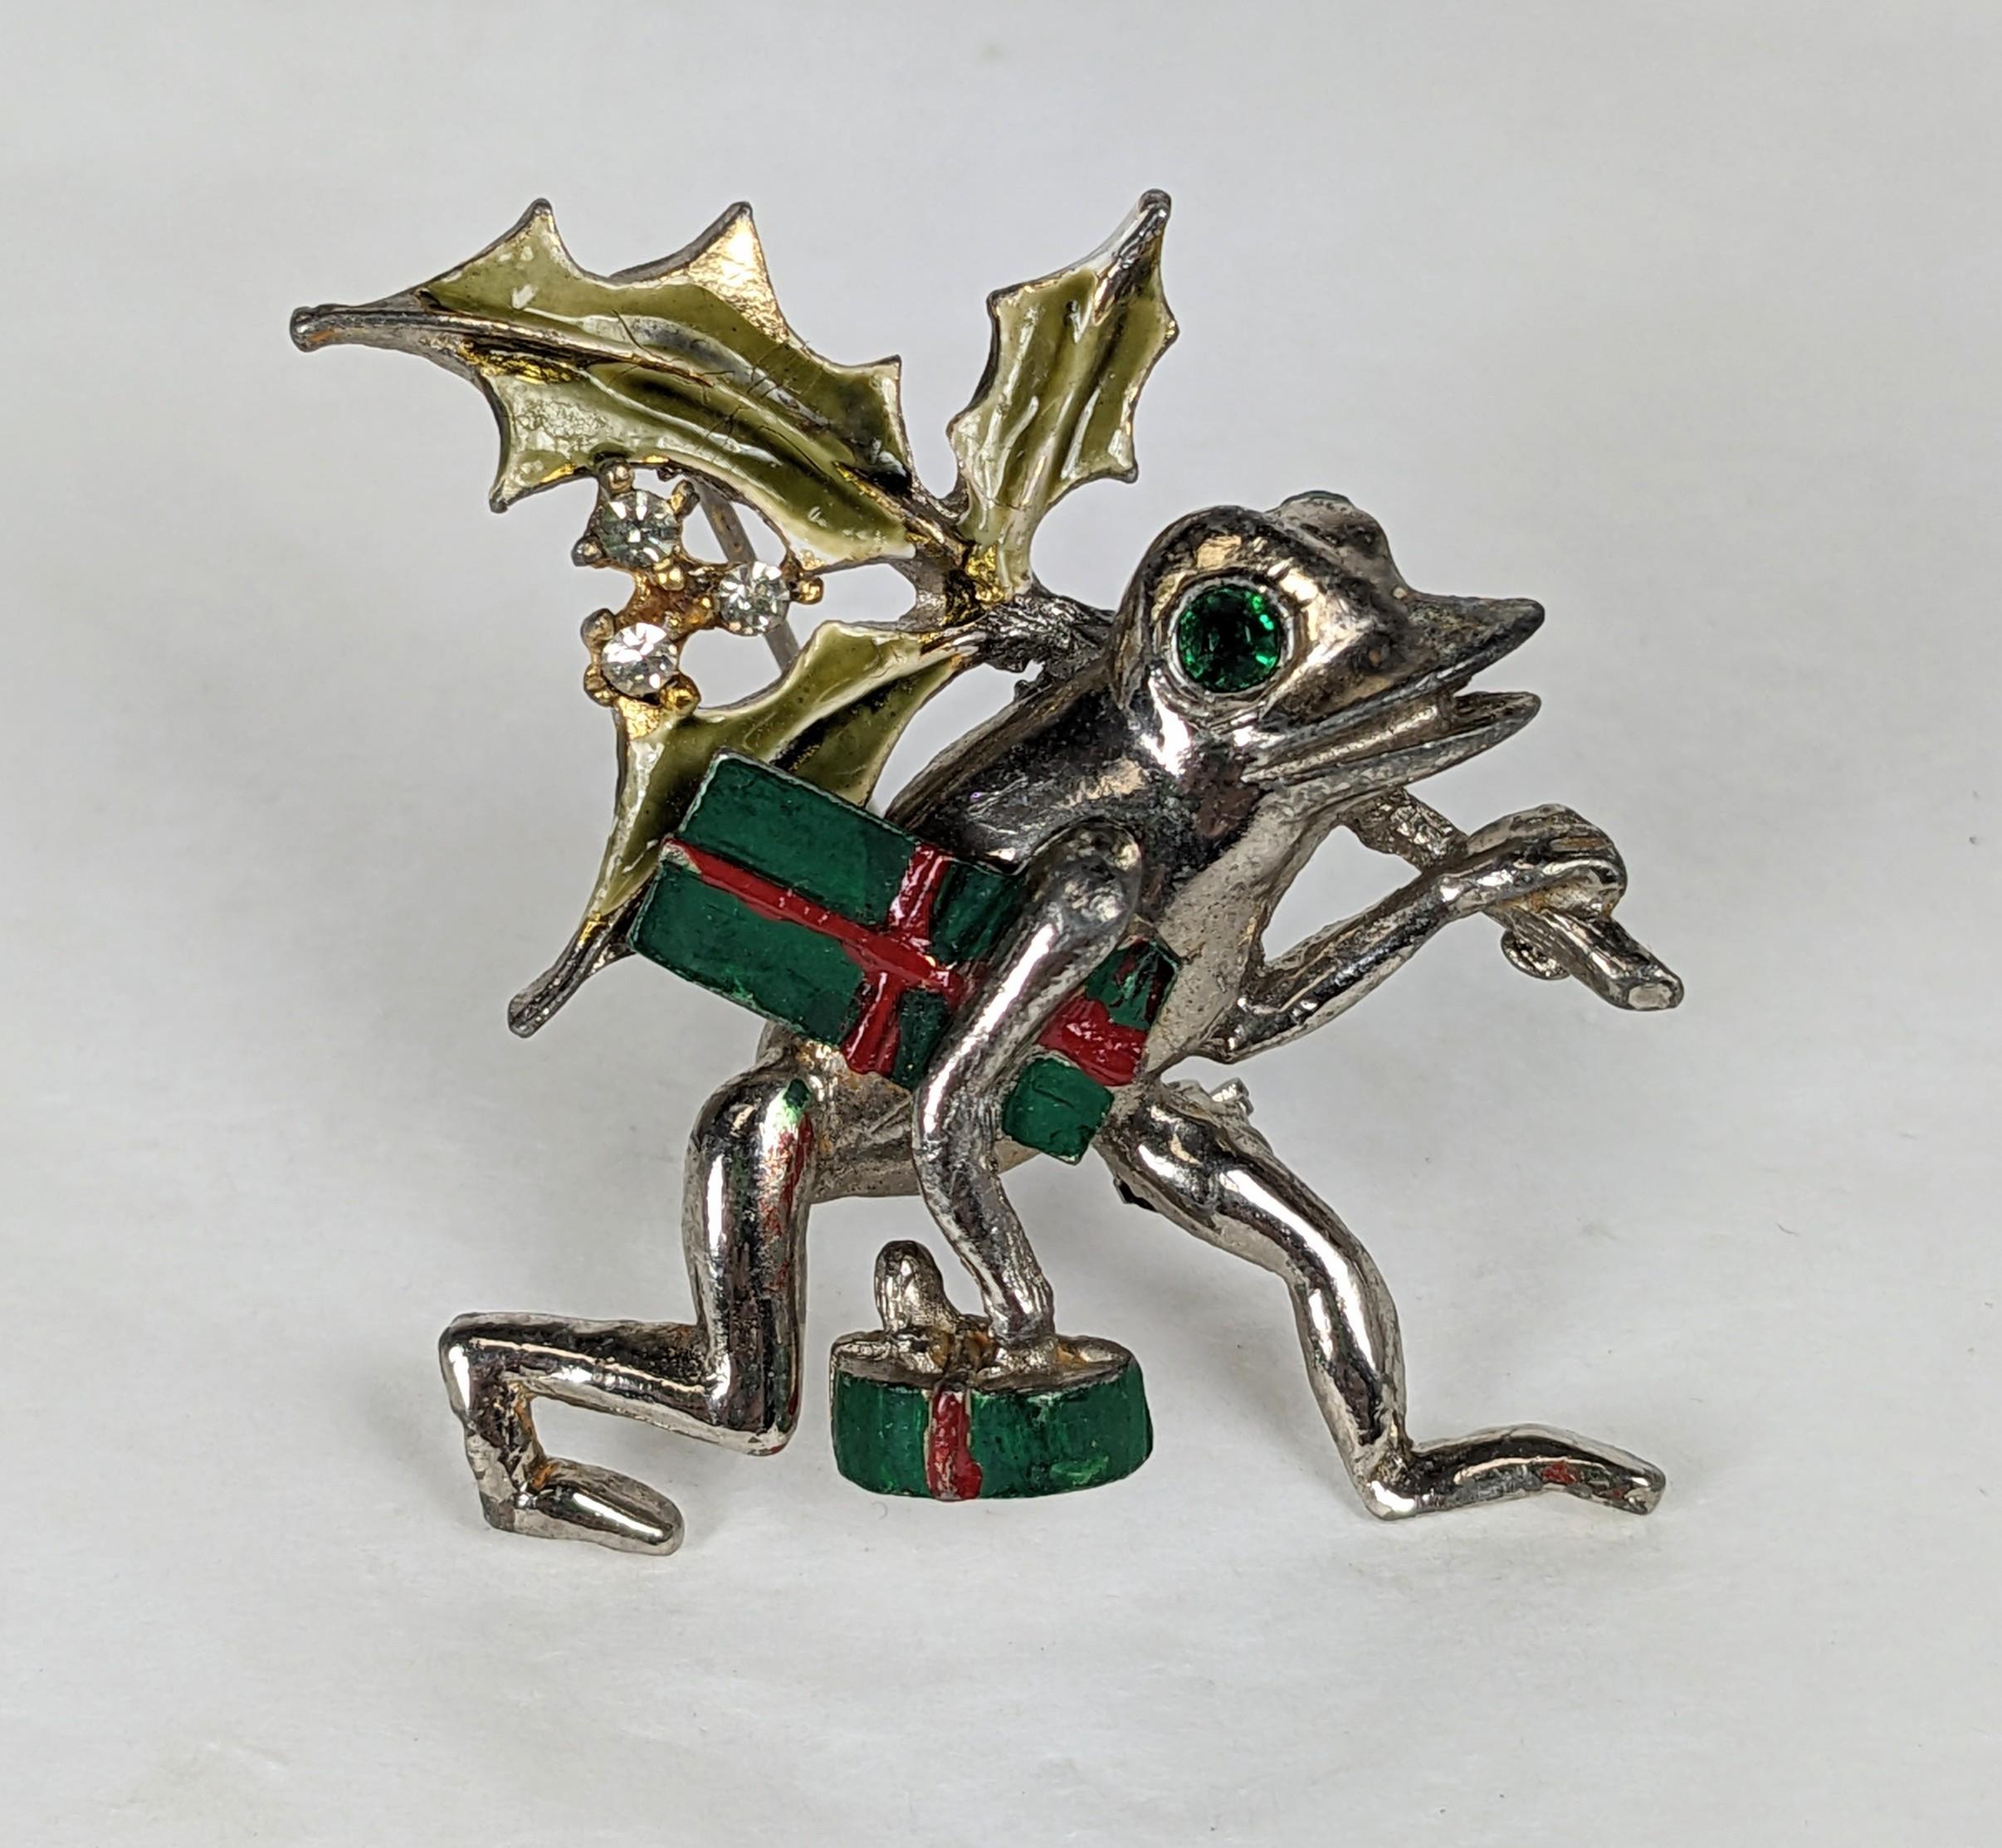 Charming Hattie Carnegie's Holiday Festive Frog from the 1950's. He's carrying presents and mistletoe to his next party.
Silvertone enamel with hand enameling. 1950's USA. 1.5